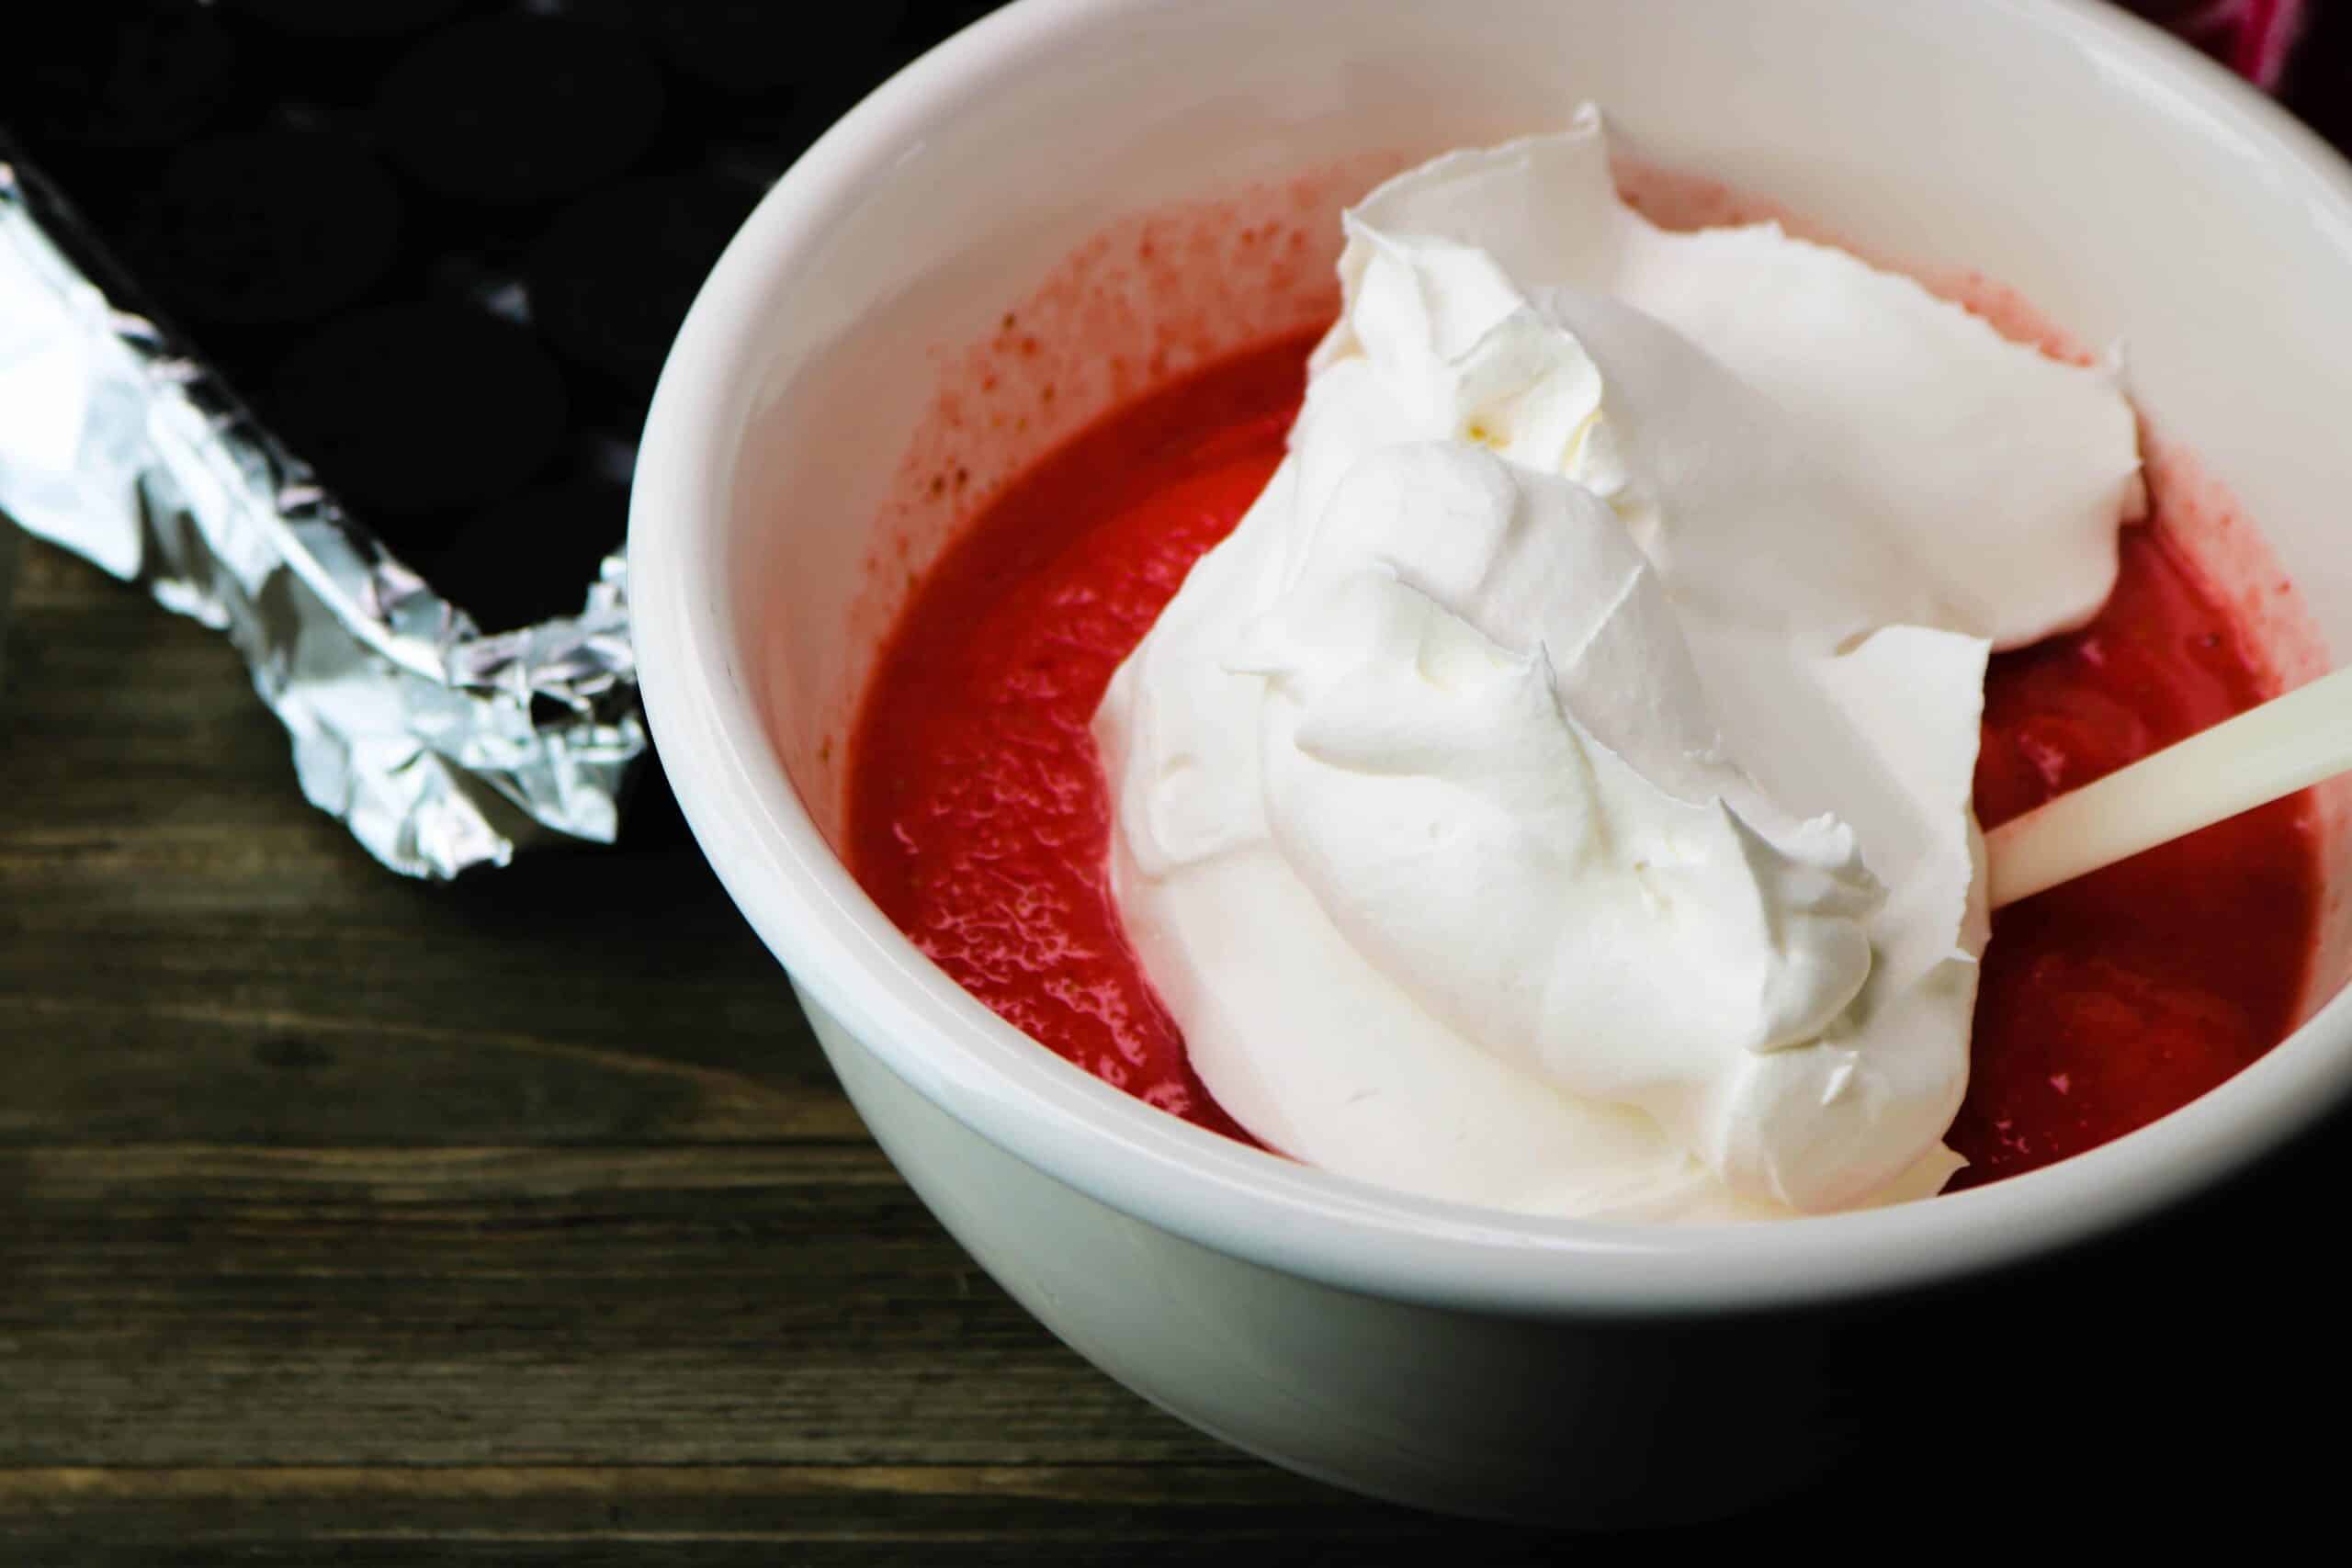 Blended strawberry dessert mixture in a white bowl with whipped cream on top